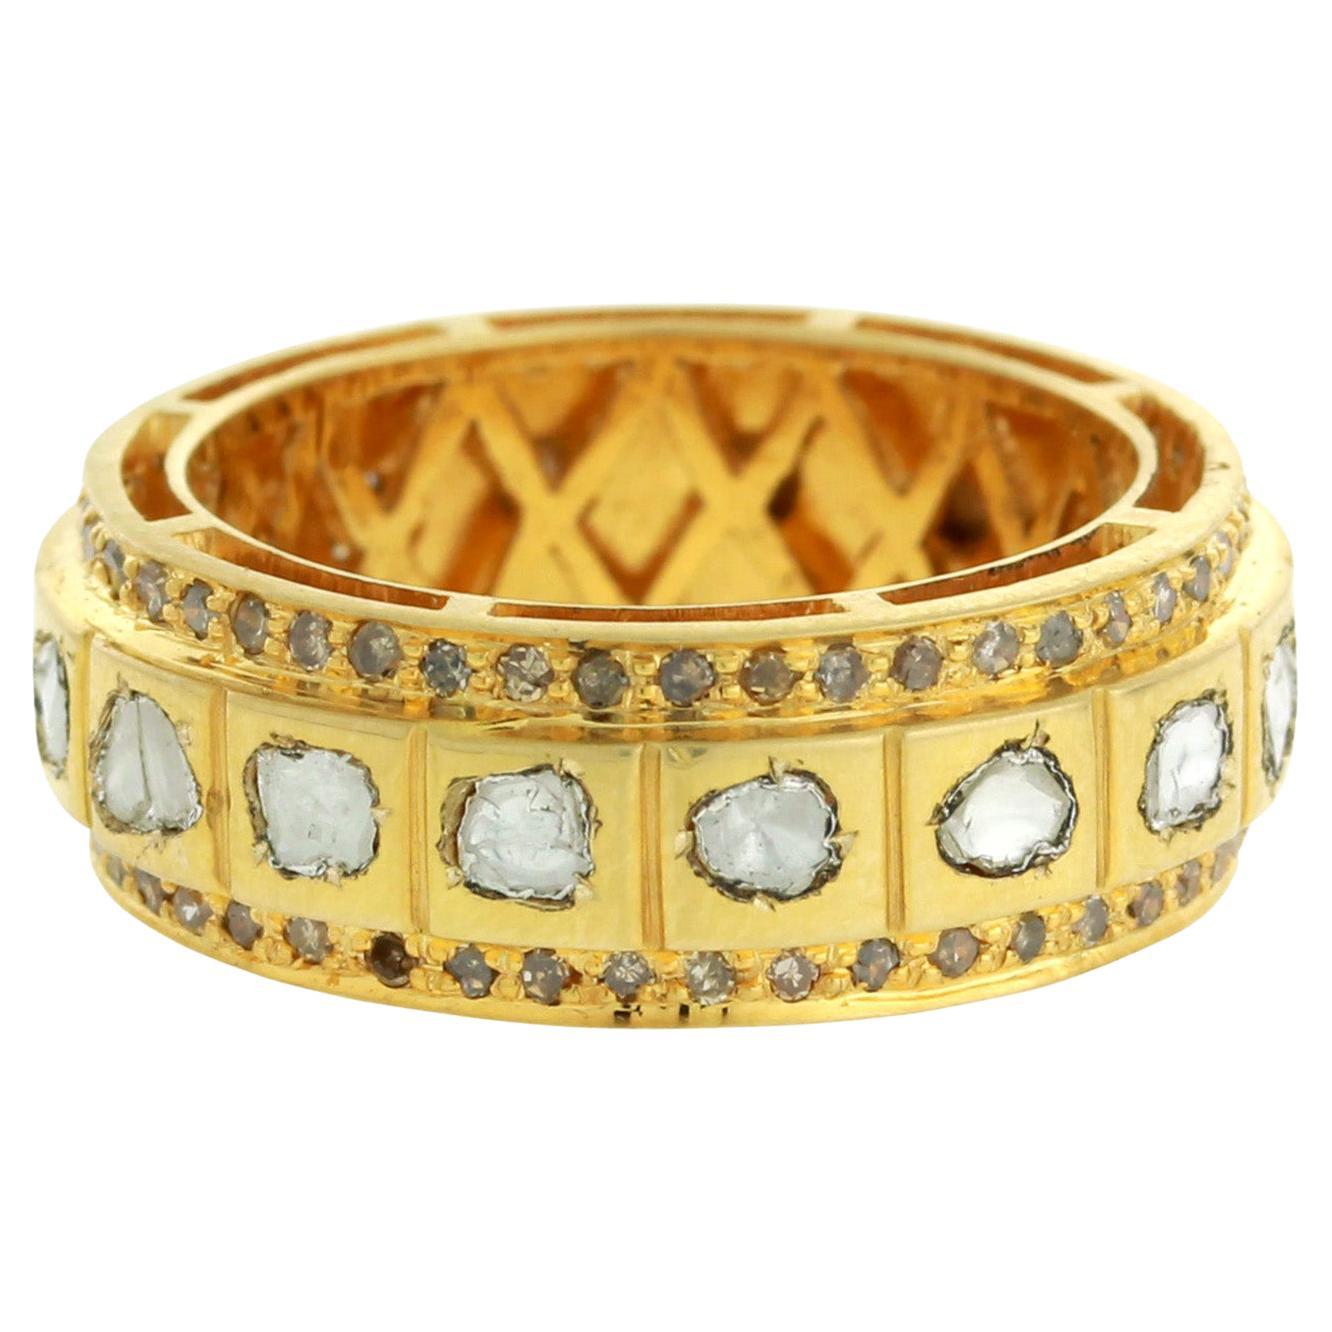 Rosecut Diamond Band Ring With Filigree Work On Interior Made In 18k Yellow Gold For Sale